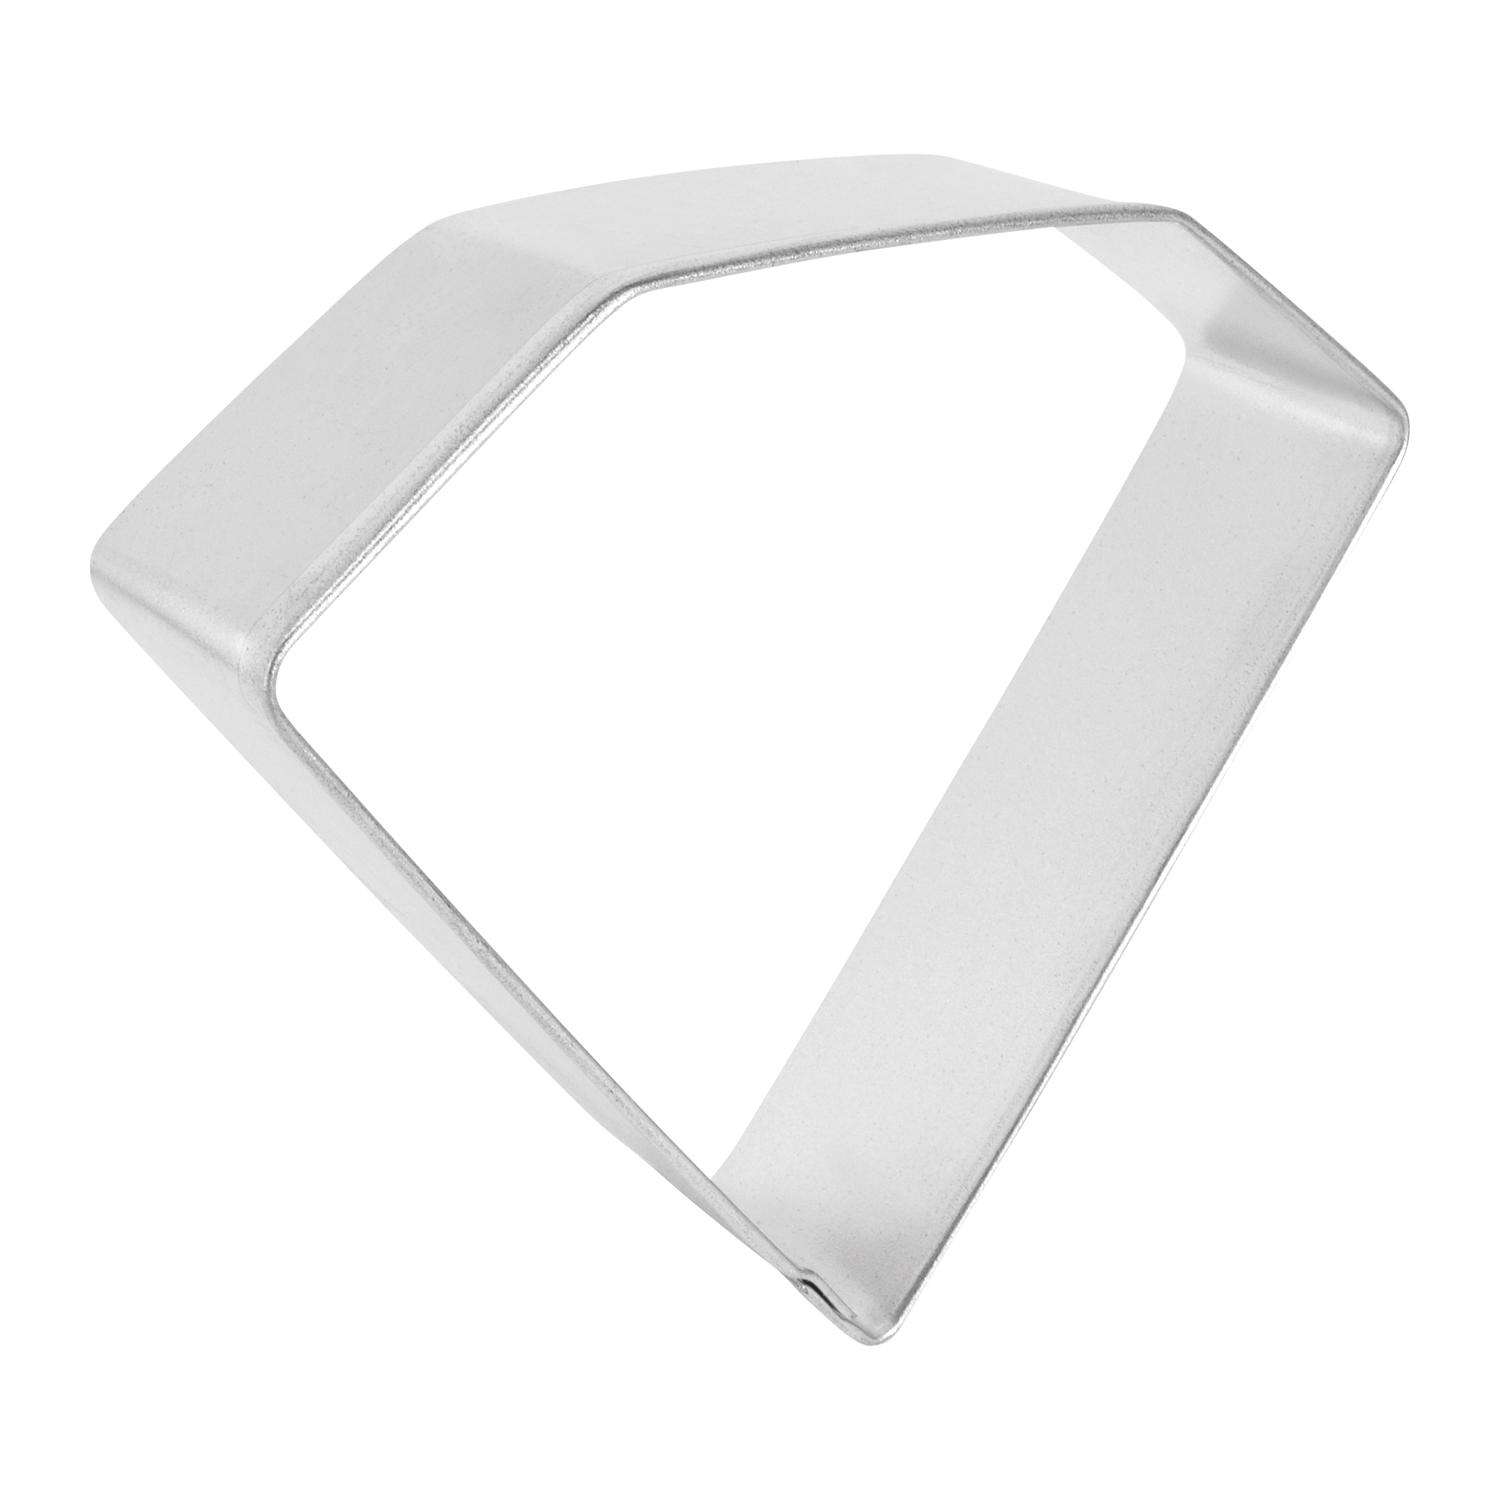 R&M International Number 1 Cookie Cutter - Silver